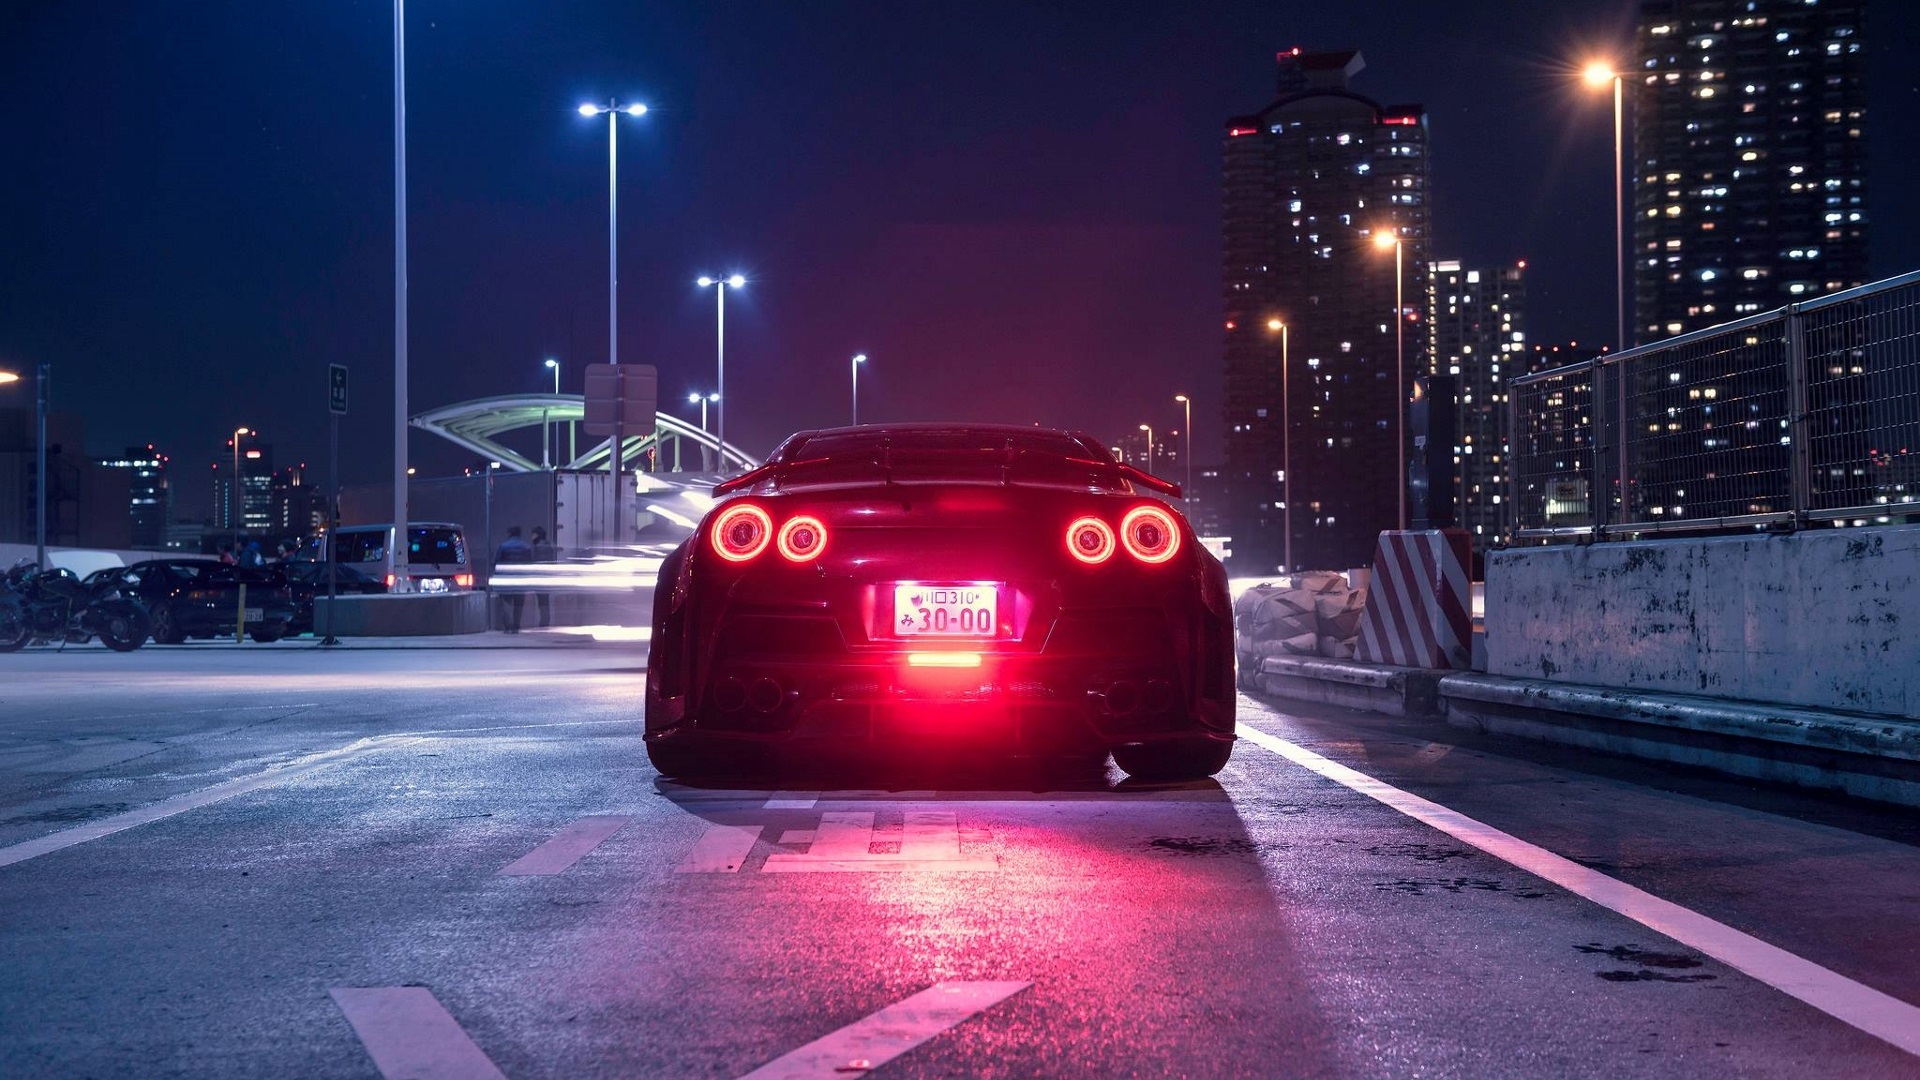 Jdm Wallpaper and HD Background free download on PicGaGa